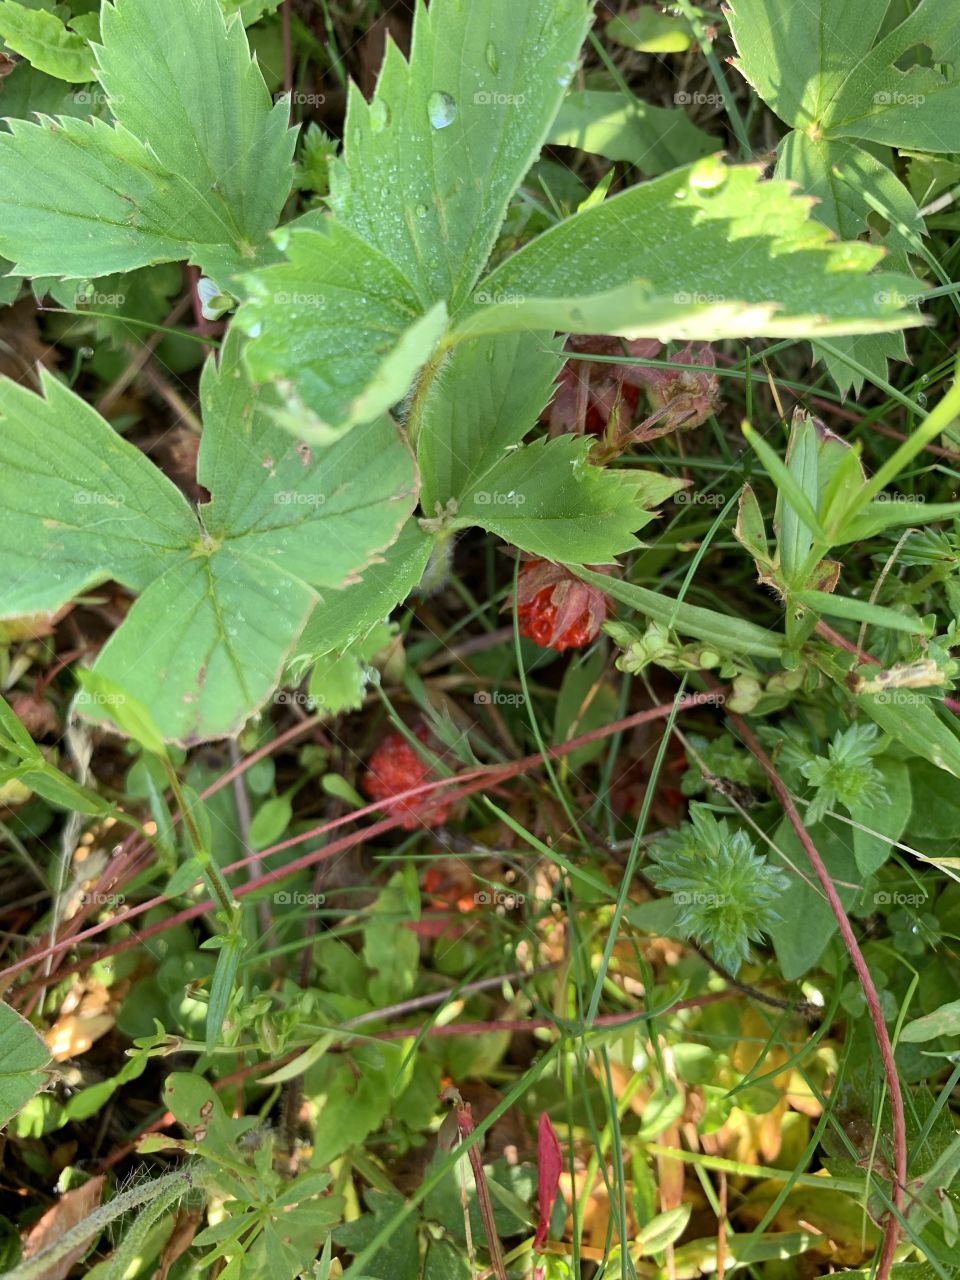 Miniature strawberries growing in our front lawn. You would have to pick about 10 buckets to make a pie but you have to love Mother Nature. 